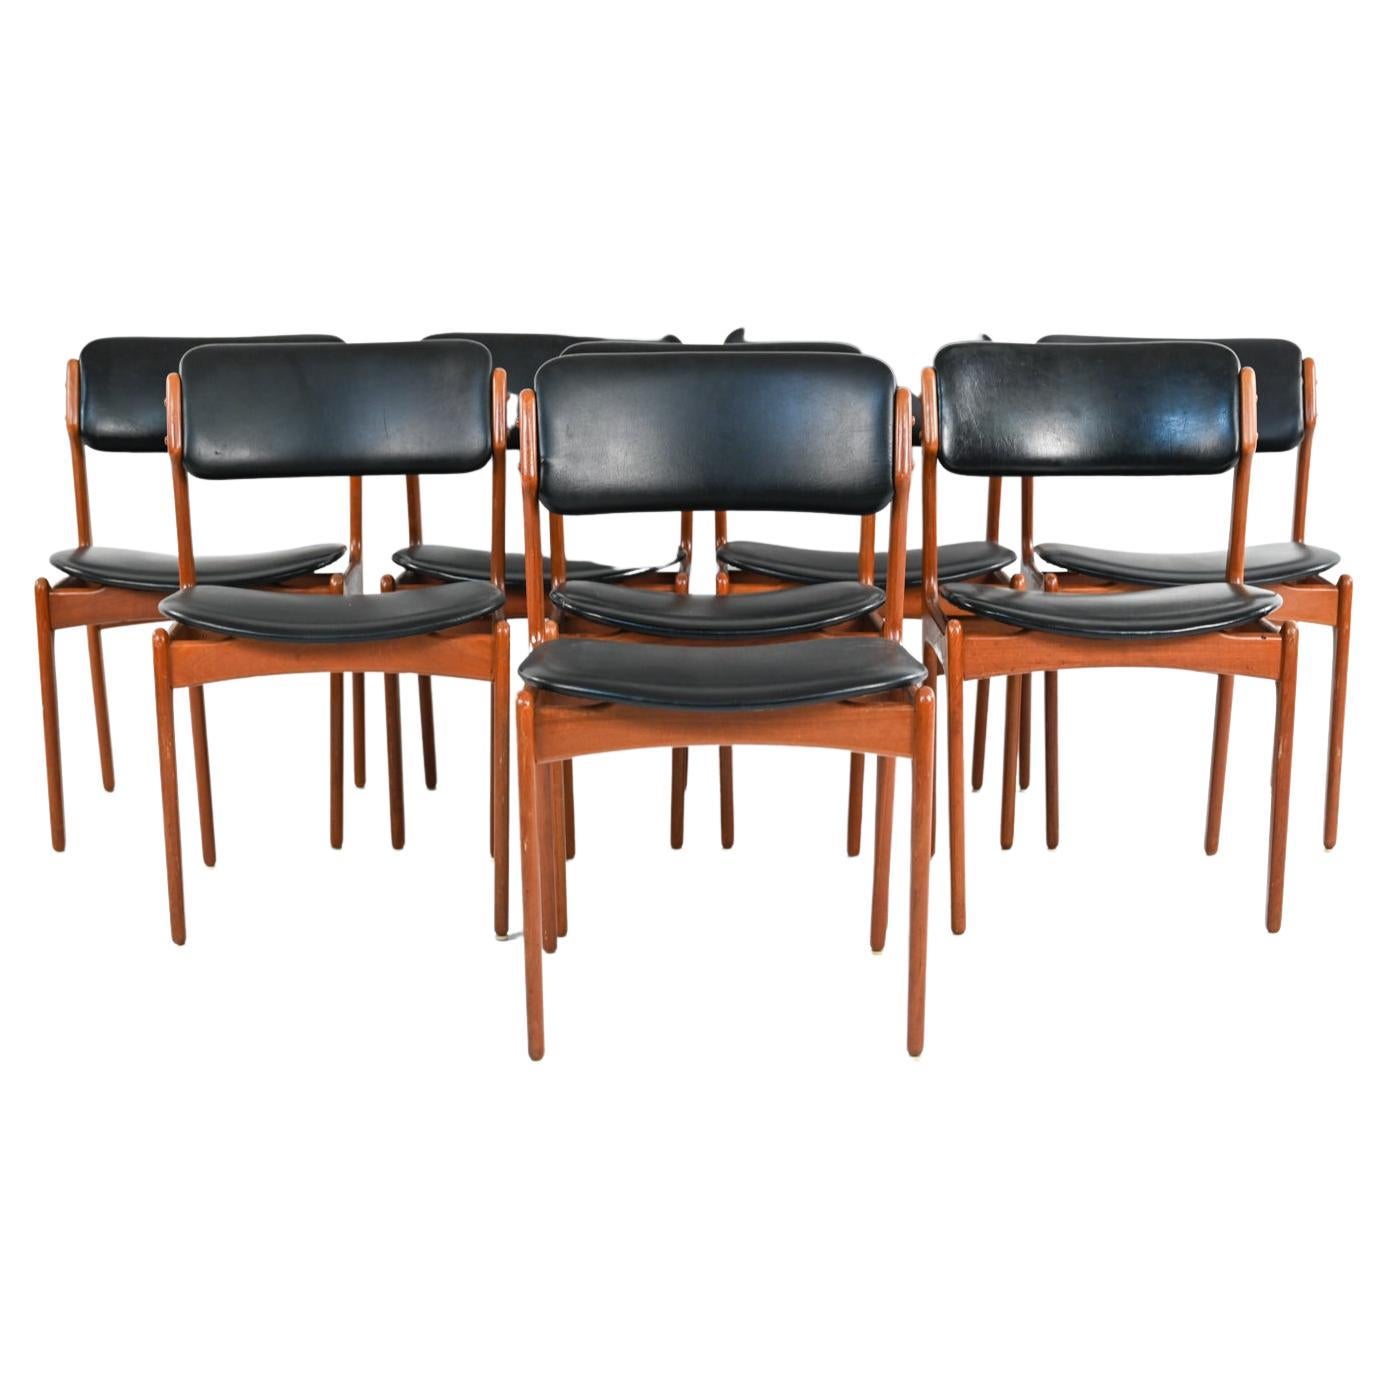 This iconic set of (8) side chairs designed by Erik Buch for Oddense Maskinsnedkeri features sculptural wood frames in solid teak, with 